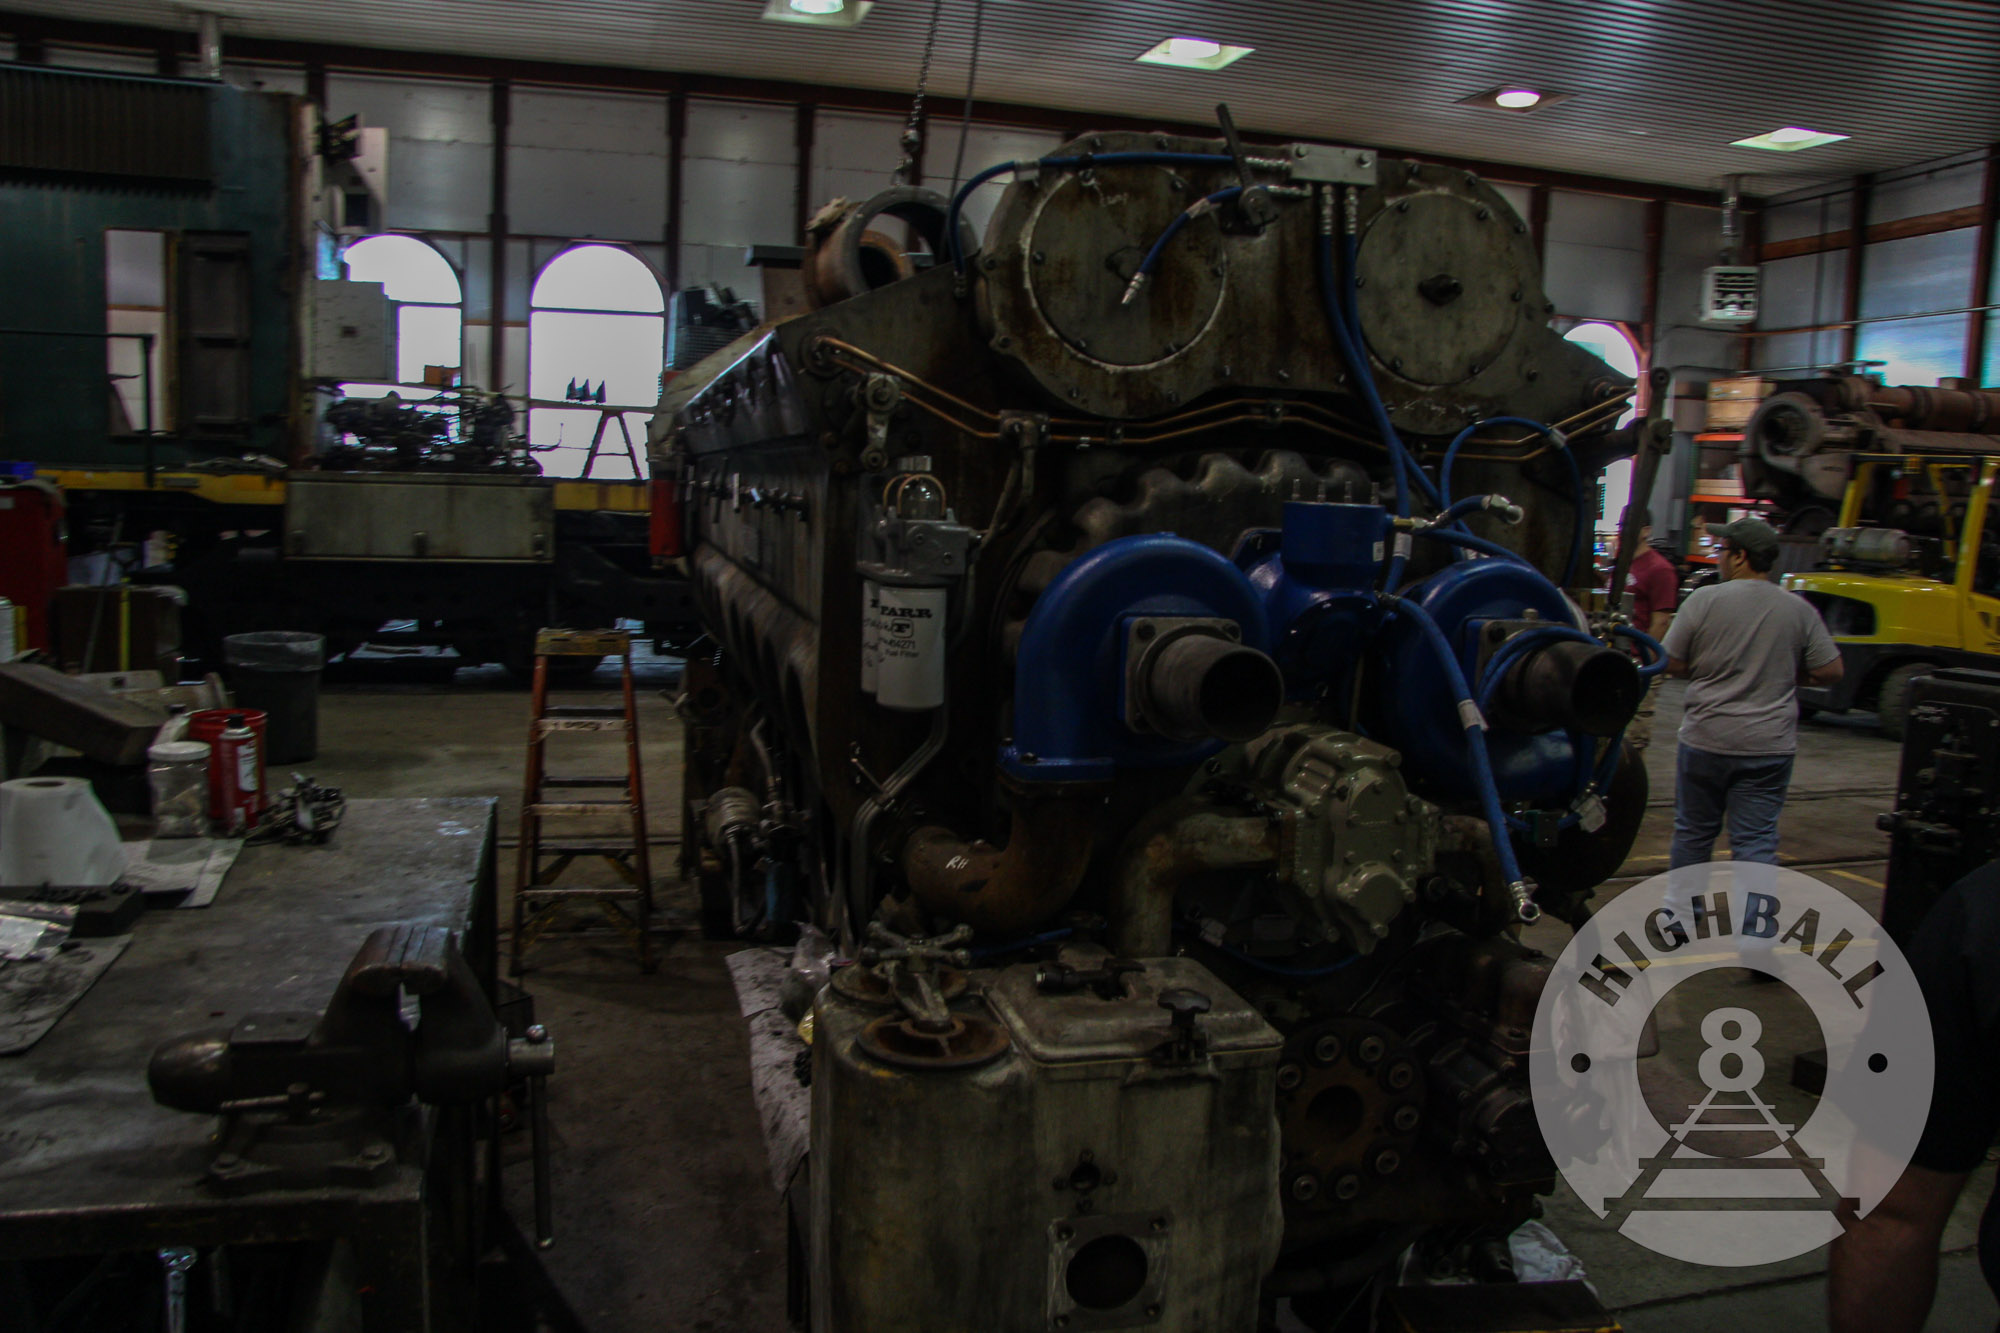 An engine in the workshops of the Reading Blue Mountain & Northern Railroad, Port Clinton, Pennsylvania, USA, 2016.